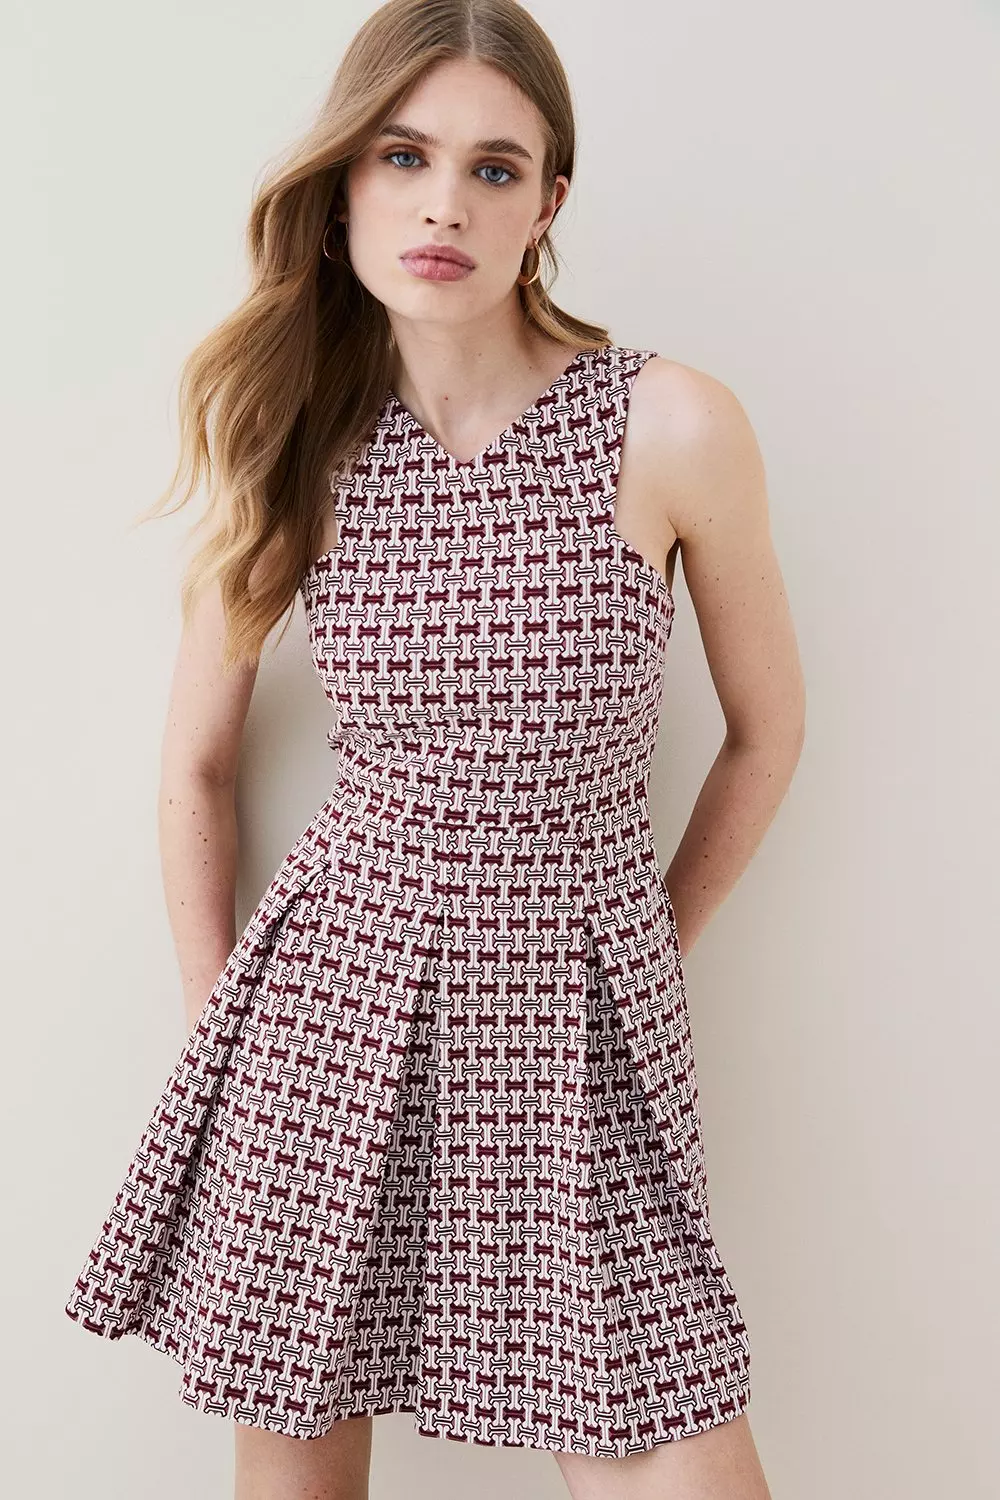 Houndstooth Dresses for Women - Up to 73% off